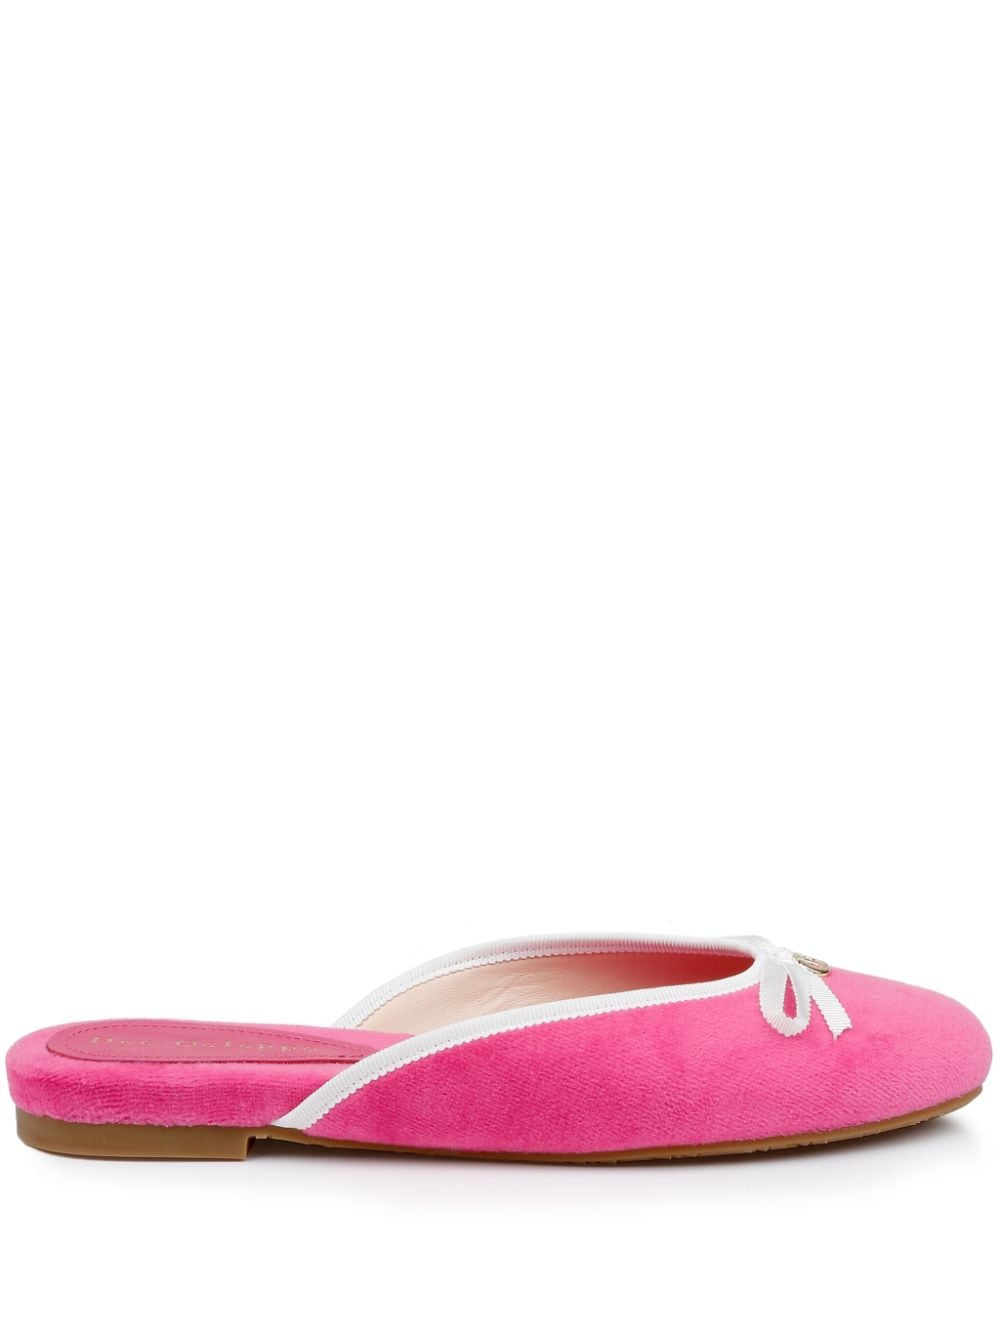 Dee Ocleppo Athens terry-cloth mules - Pink von Dee Ocleppo